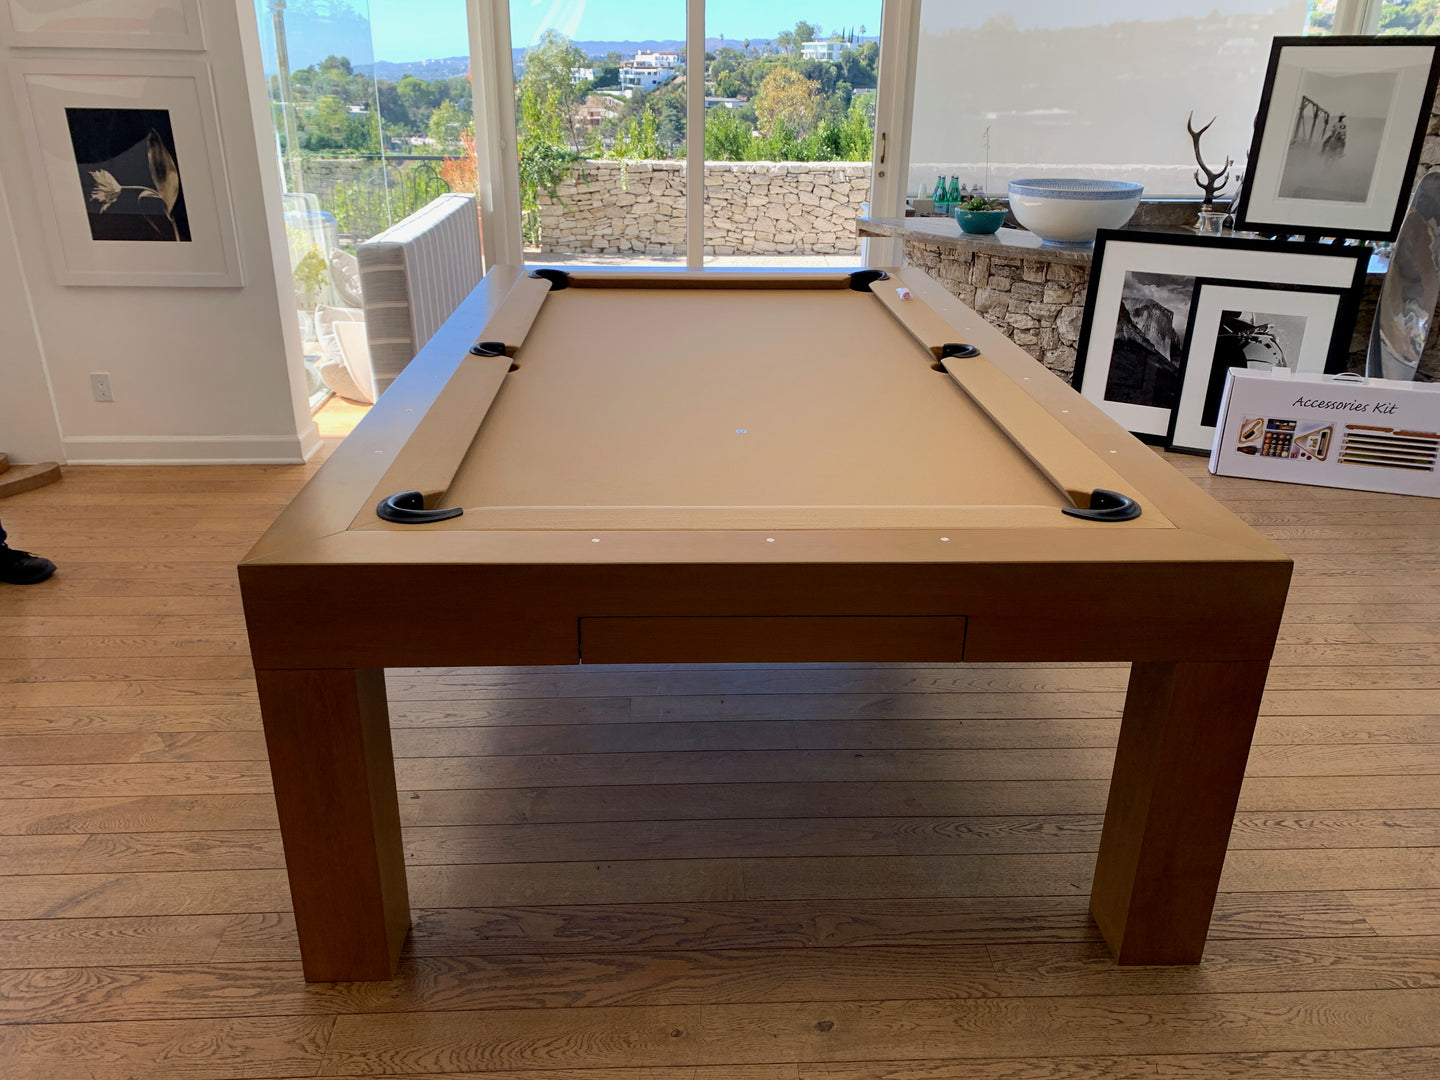 The Modern X14 Pool Table